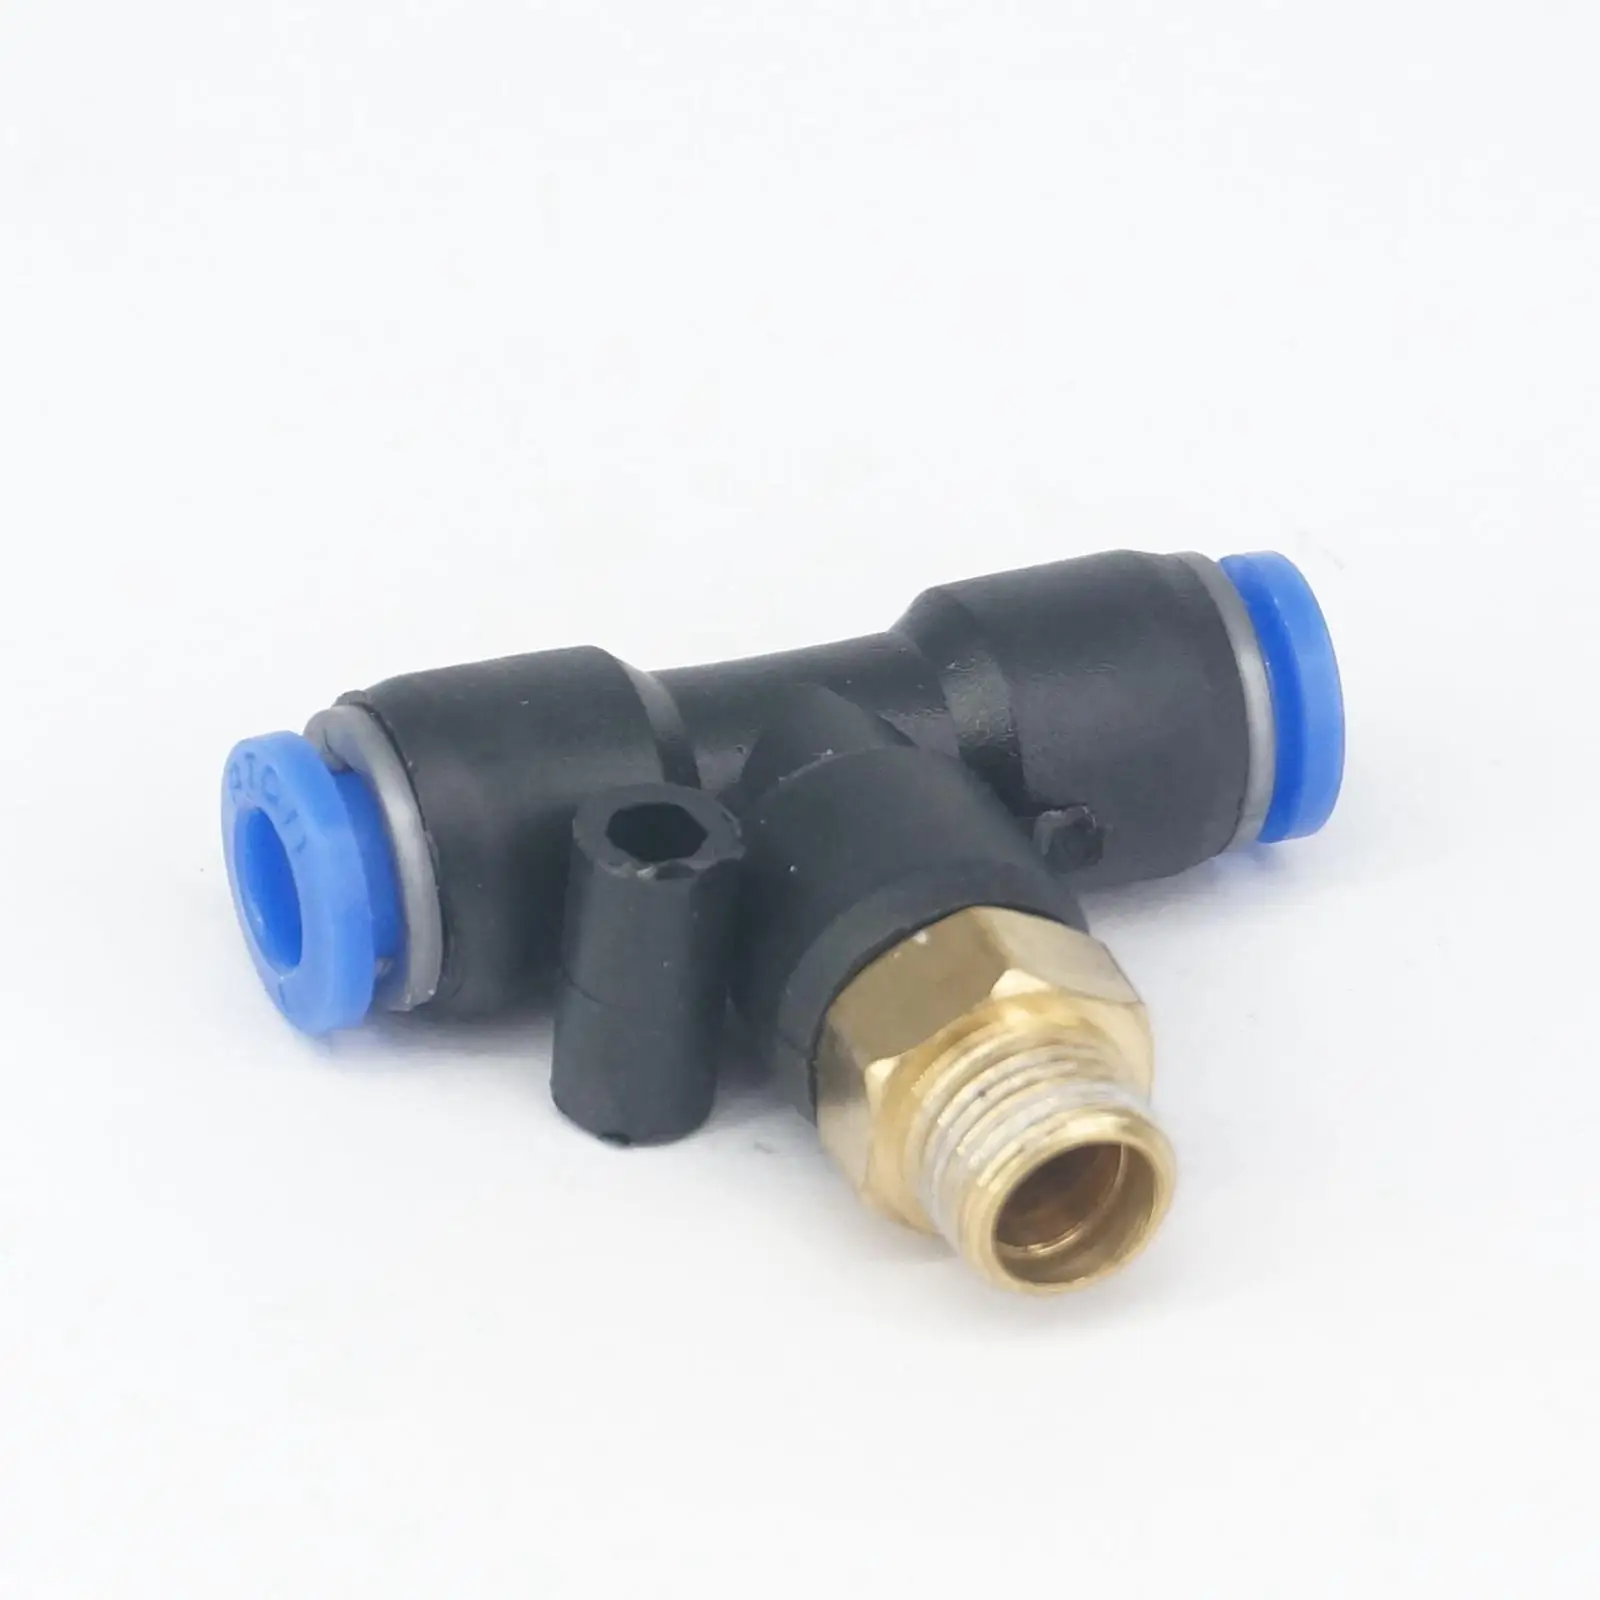 Pneumatic 6 mm Tube x 1/8" BSP Thread Male Tee Branch Connector Push In Fitting 